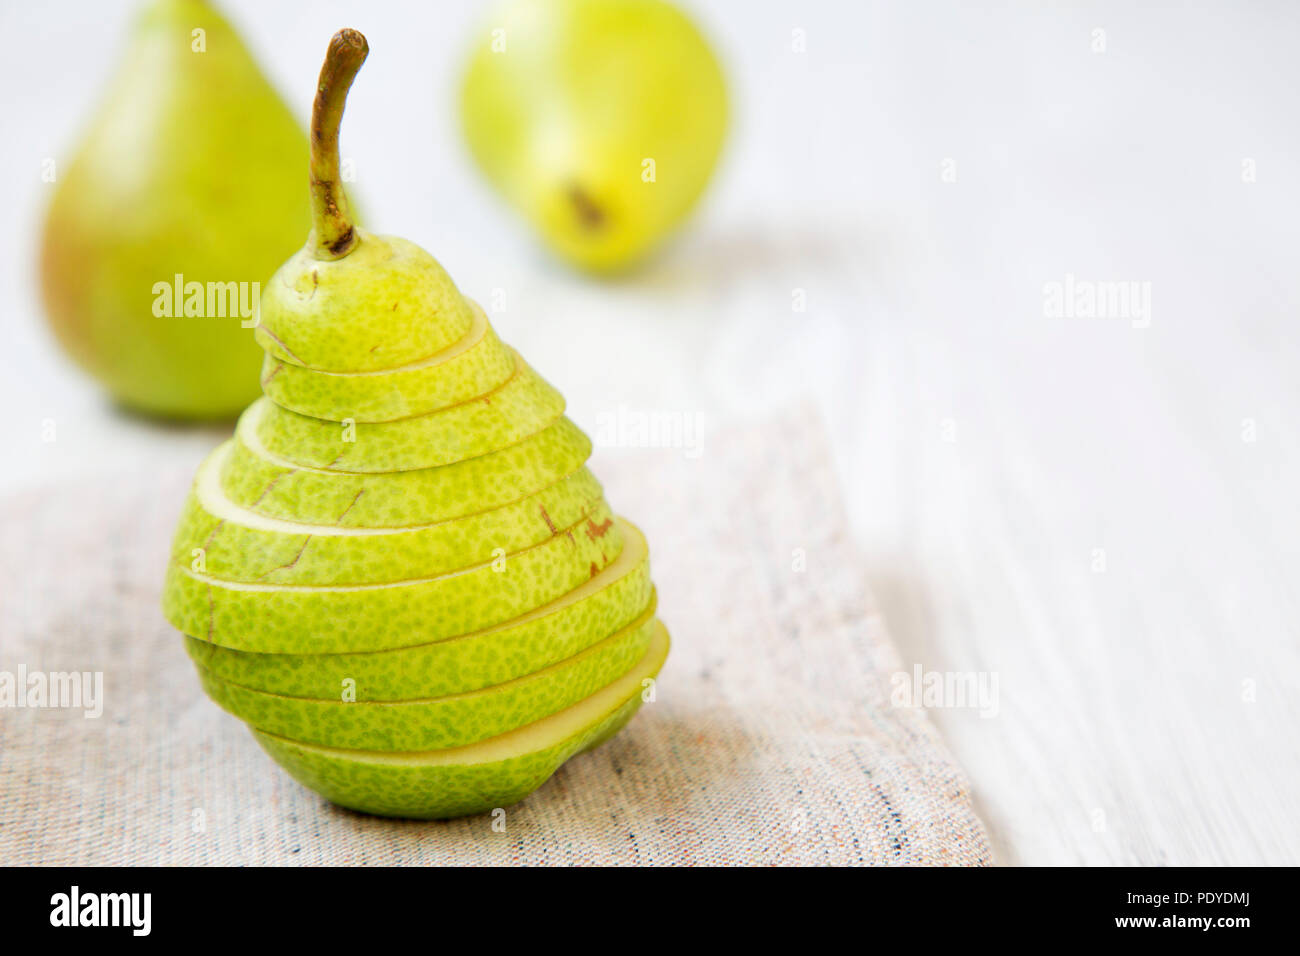 Sliced fresh pear on cloth, closeup. Side view. Copy space. Stock Photo